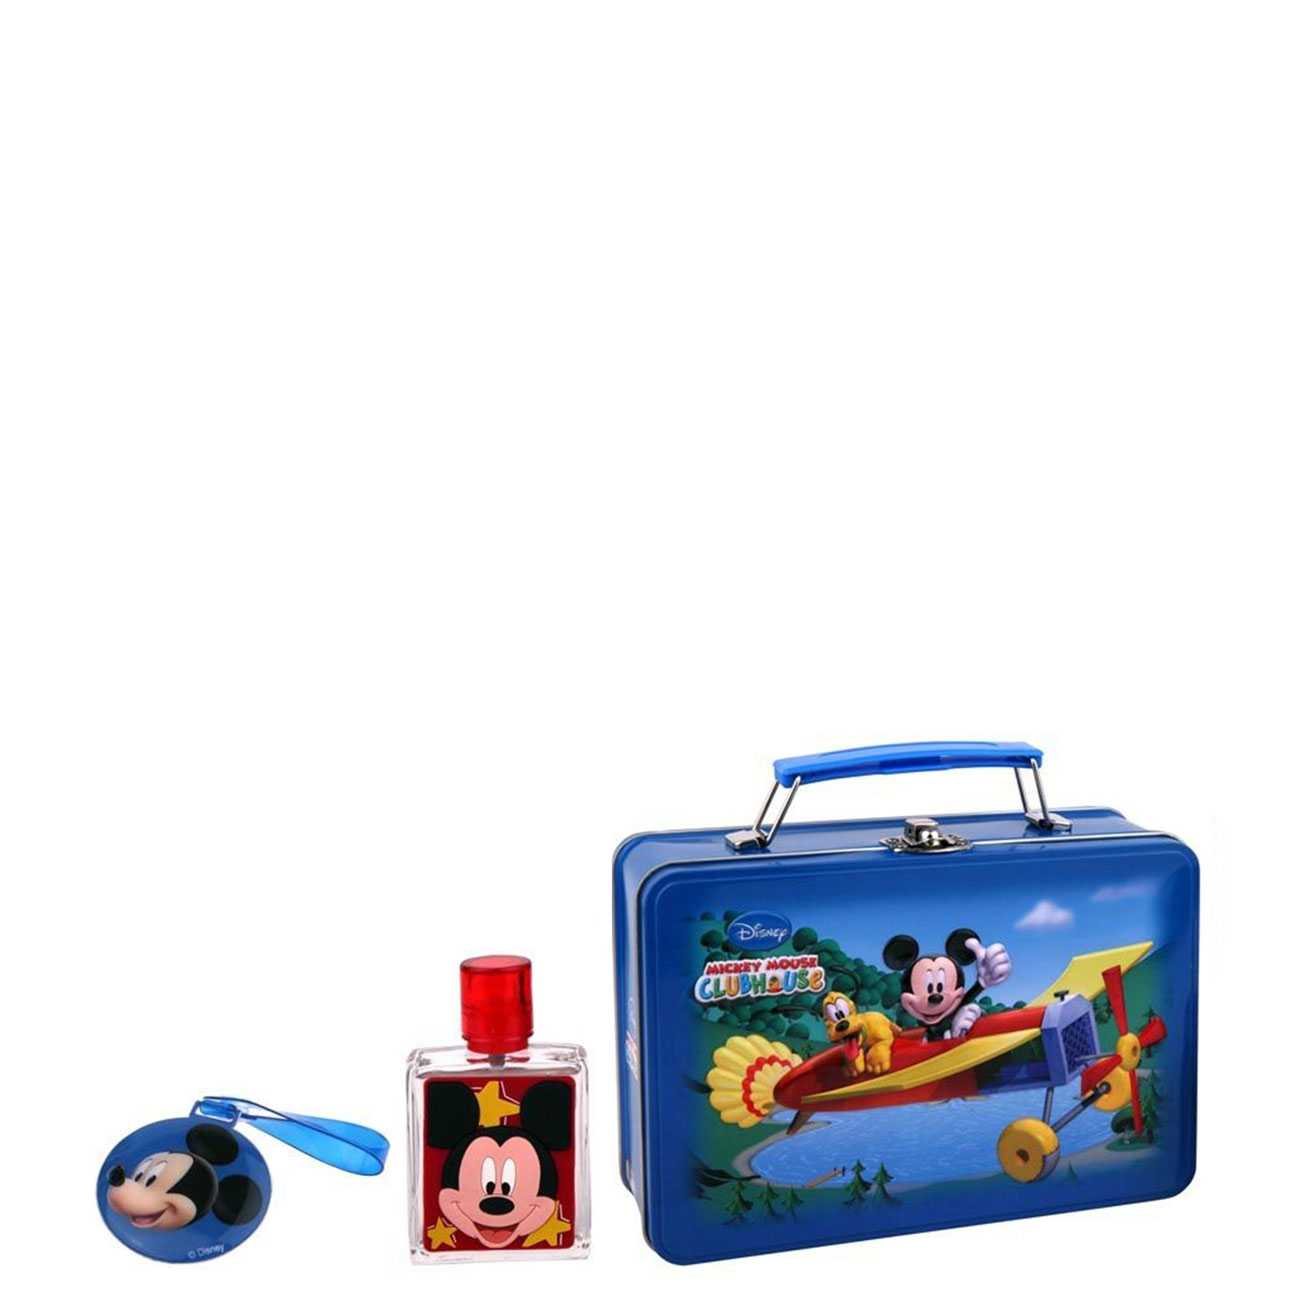 MICKEY MOUSE TRAVEL CASE LUGGAGE TAG 50 ML 50ml